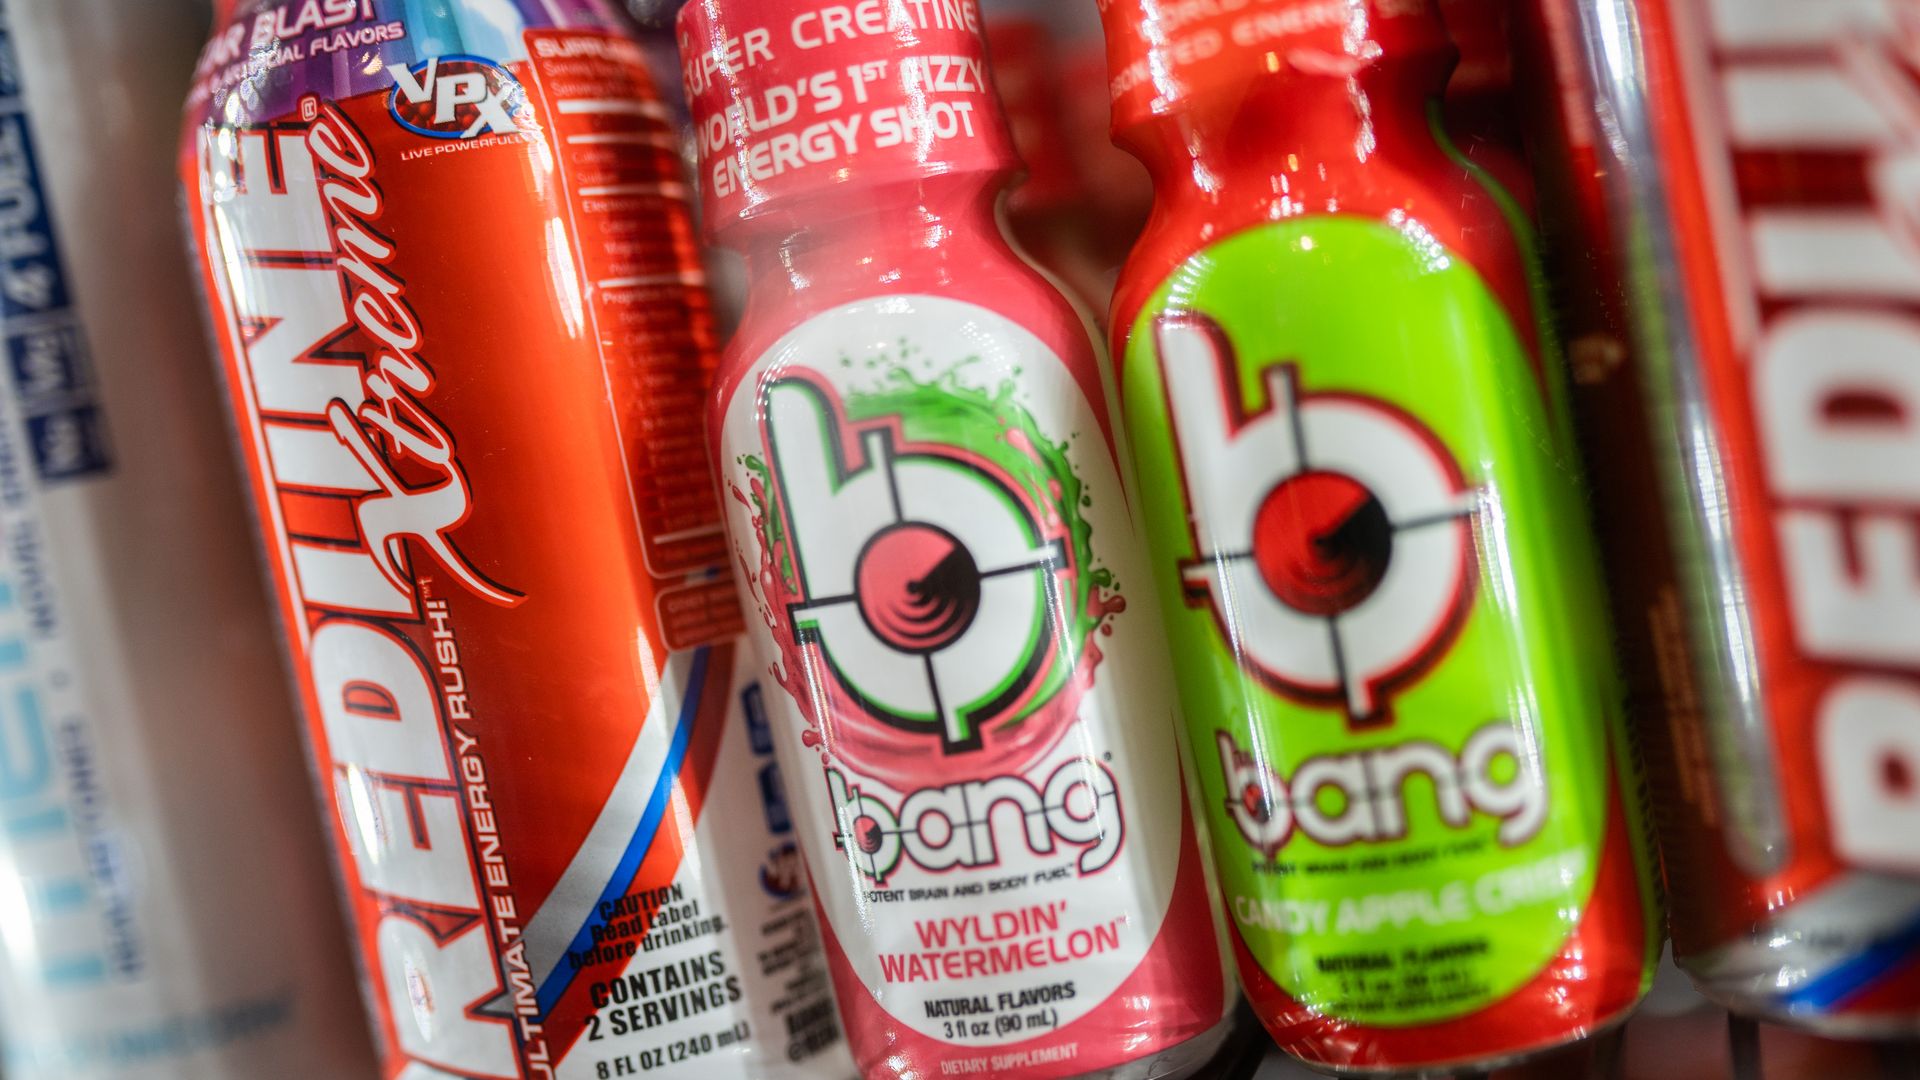 Brightly colored Bang Energy drink bottles sit on a shelf.